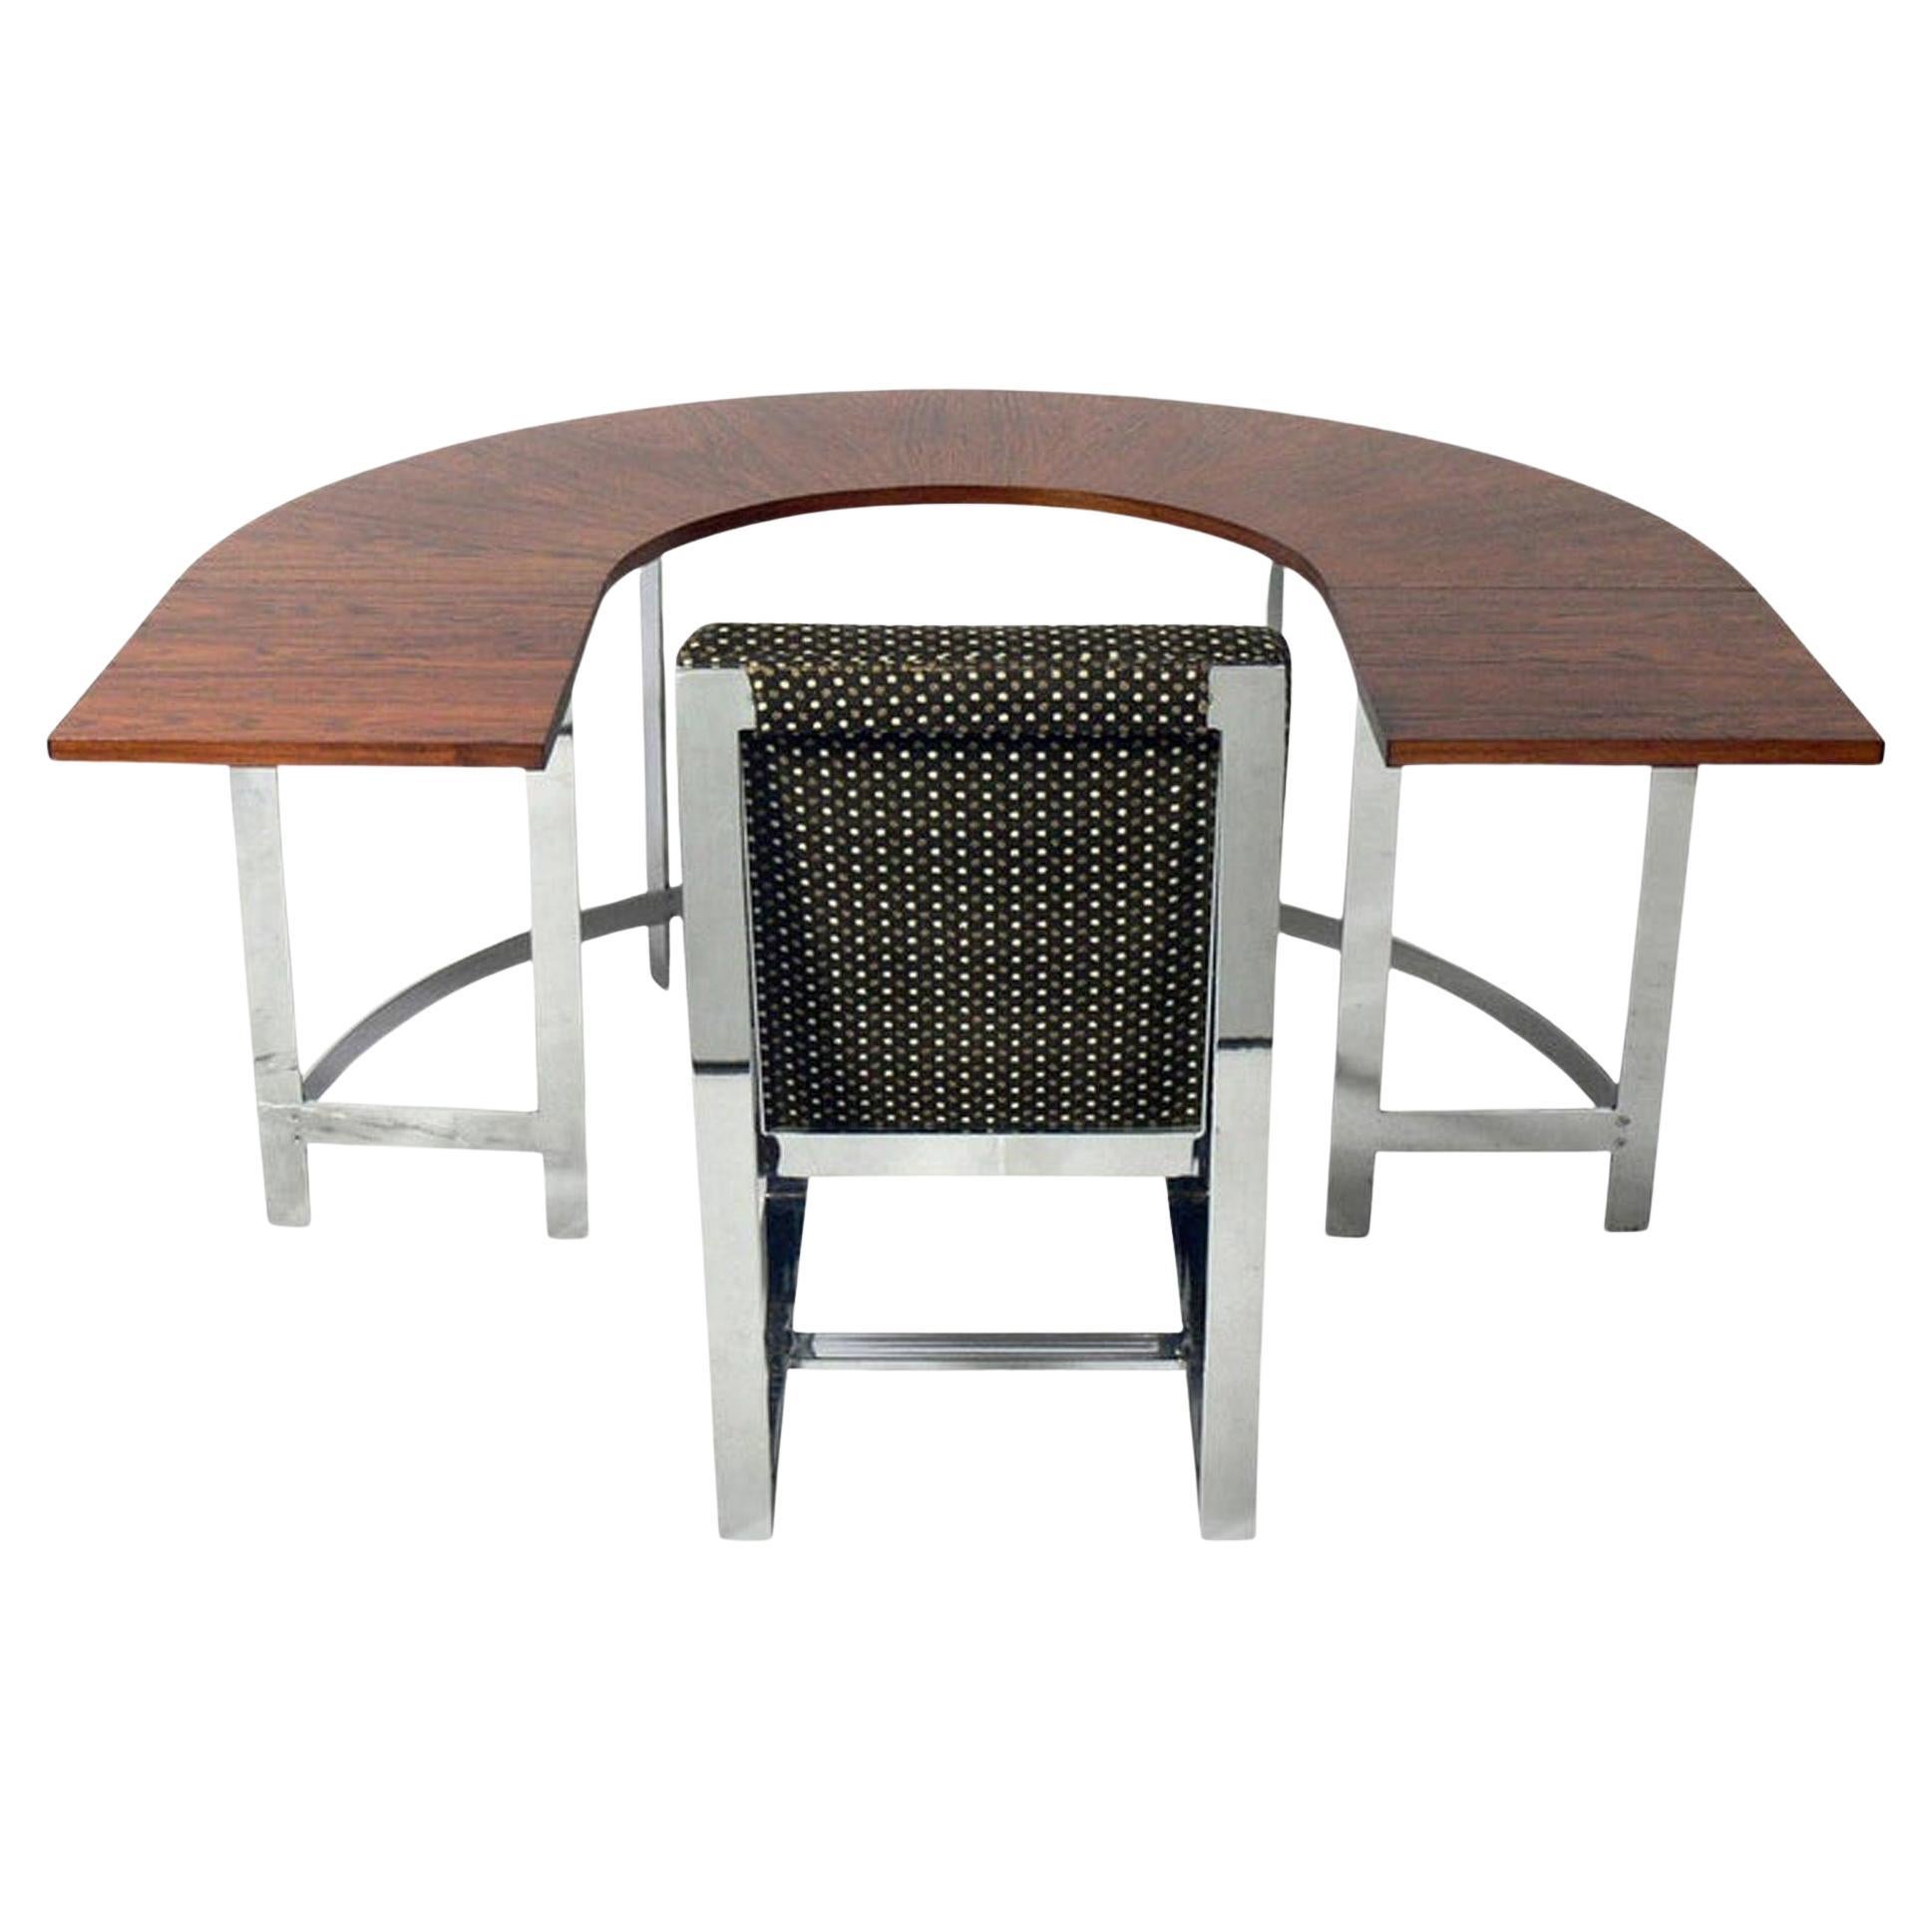 Rosewood & Chrome Arc Desk and Chair